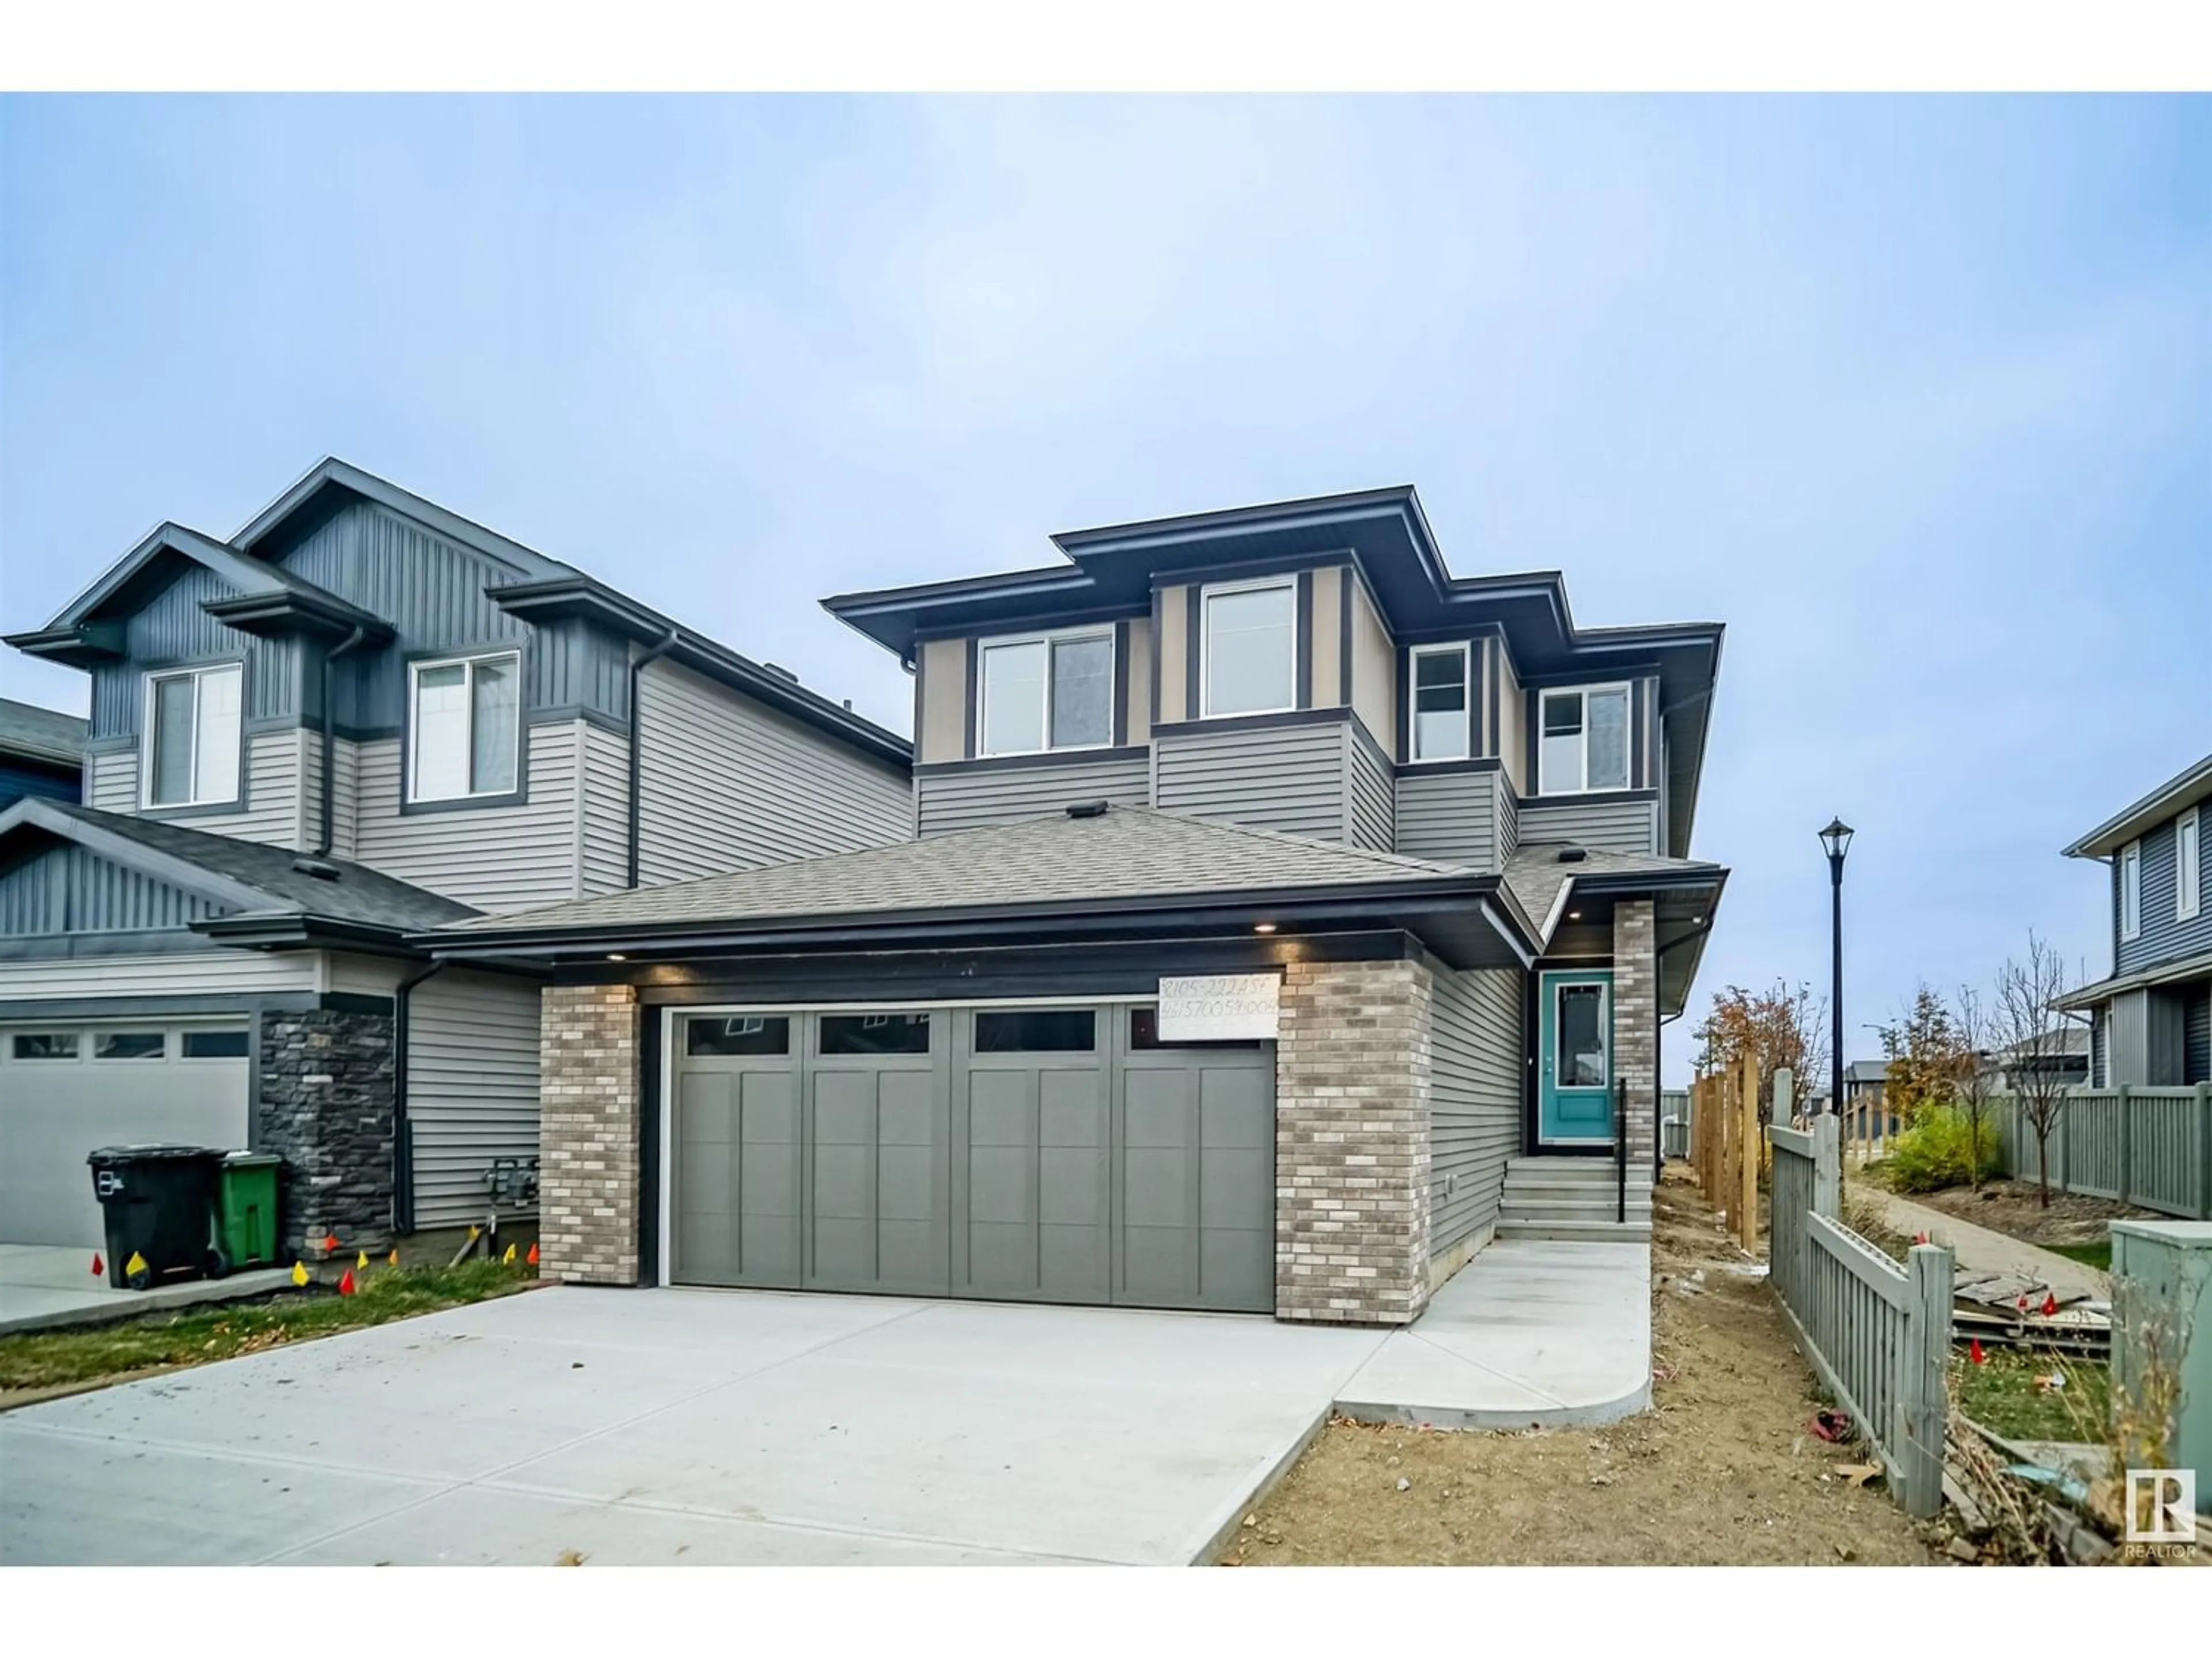 Frontside or backside of a home for 298 Sunland WY, Sherwood Park Alberta T8H2X7